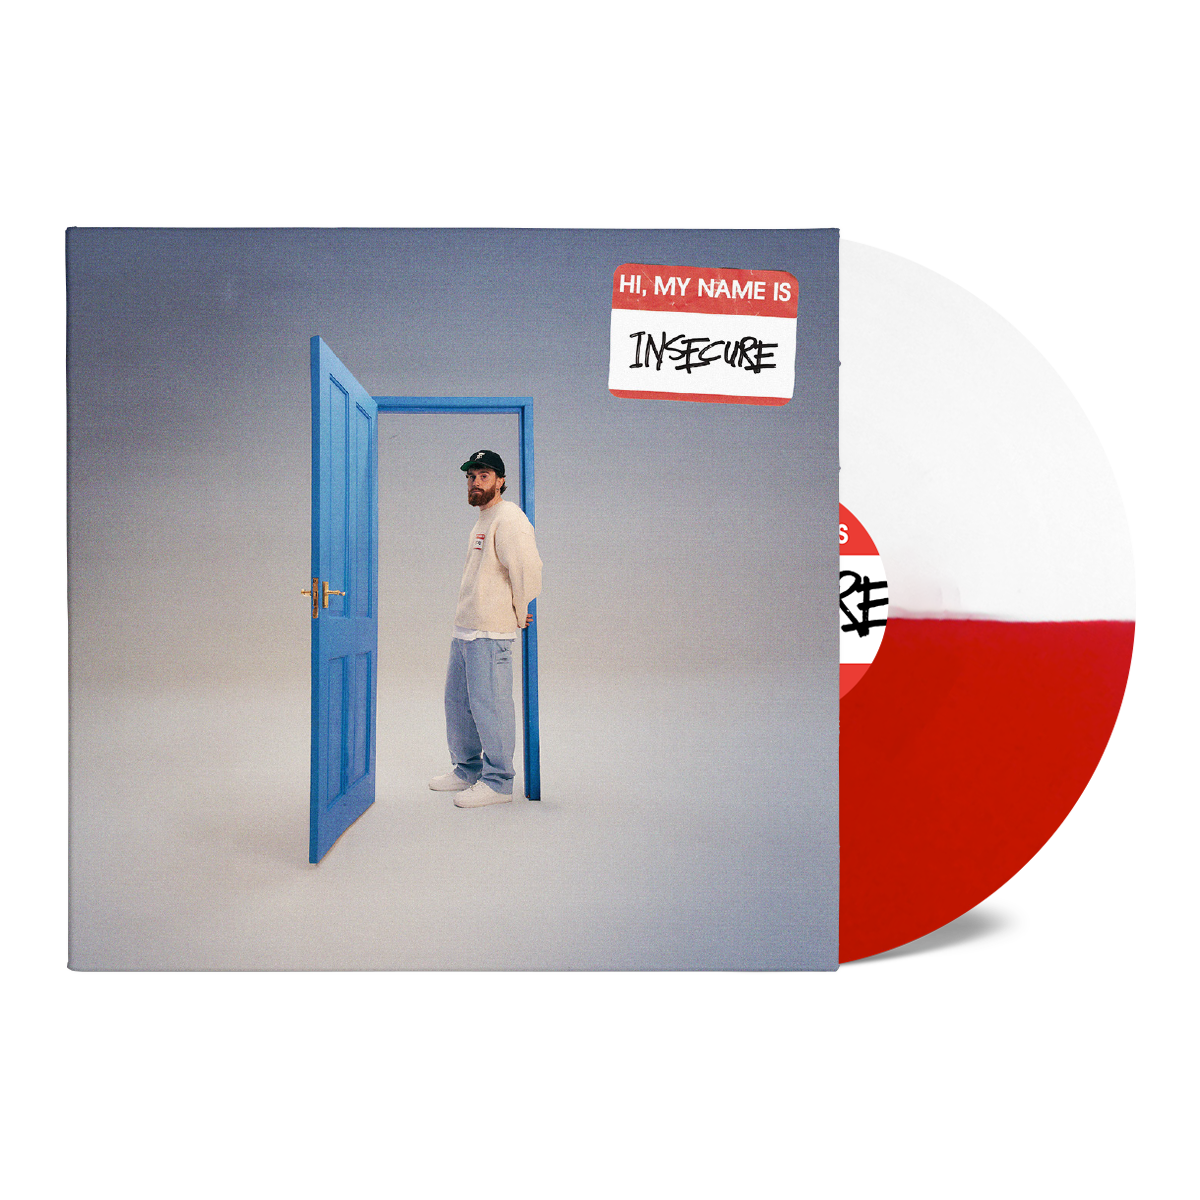 hi, my name is insecure - CD, Red/White Vinyl & Signed Art Card